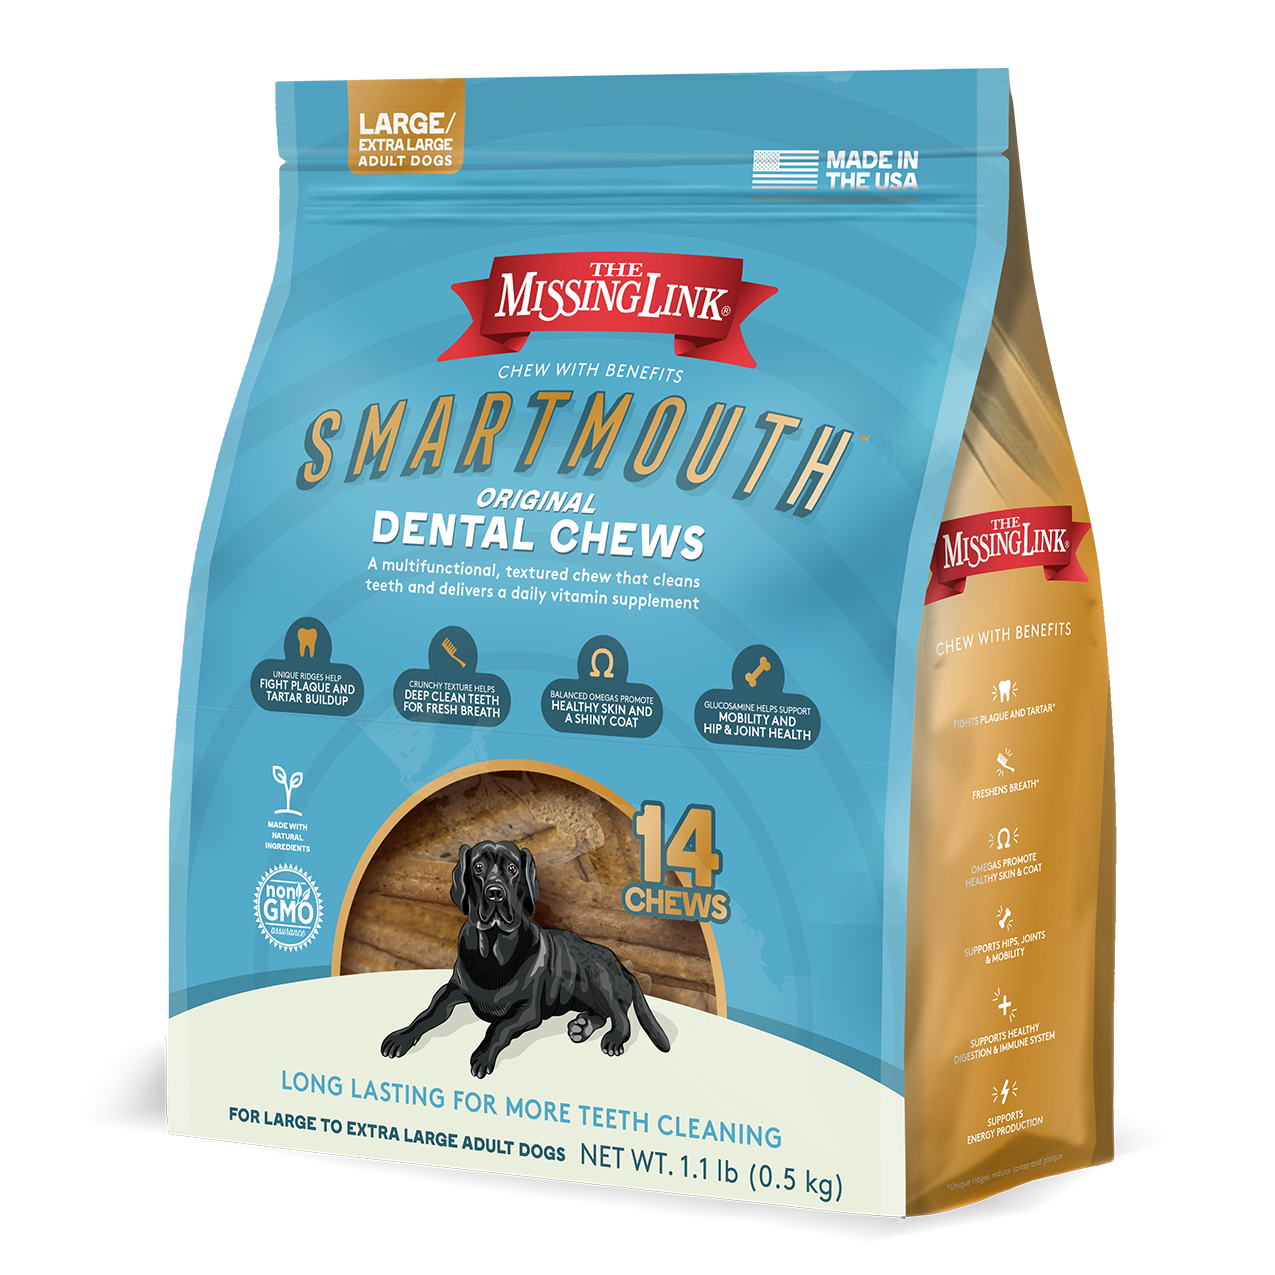 Missing Link Smartmouth Dental Chew LG/XLG Dog - 14ct